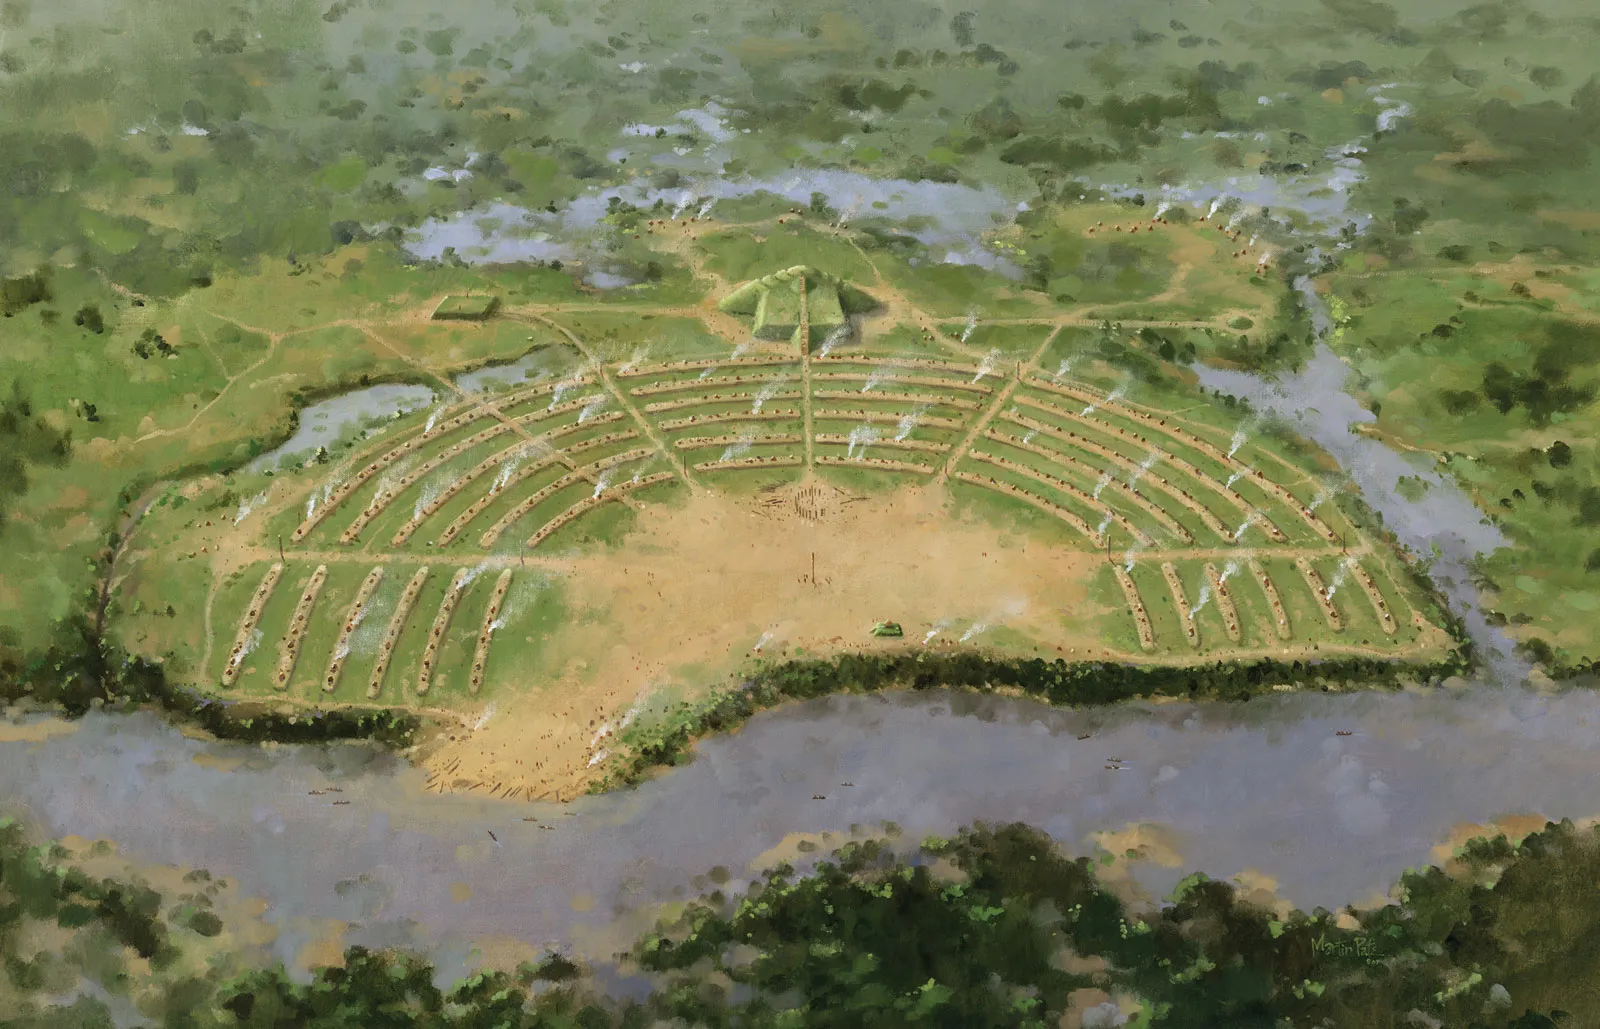 Artist's depiction of Poverty Point as it may have looked while occupied. An arc-like shape of long mounds faces a river, with larger platform mounds further back.